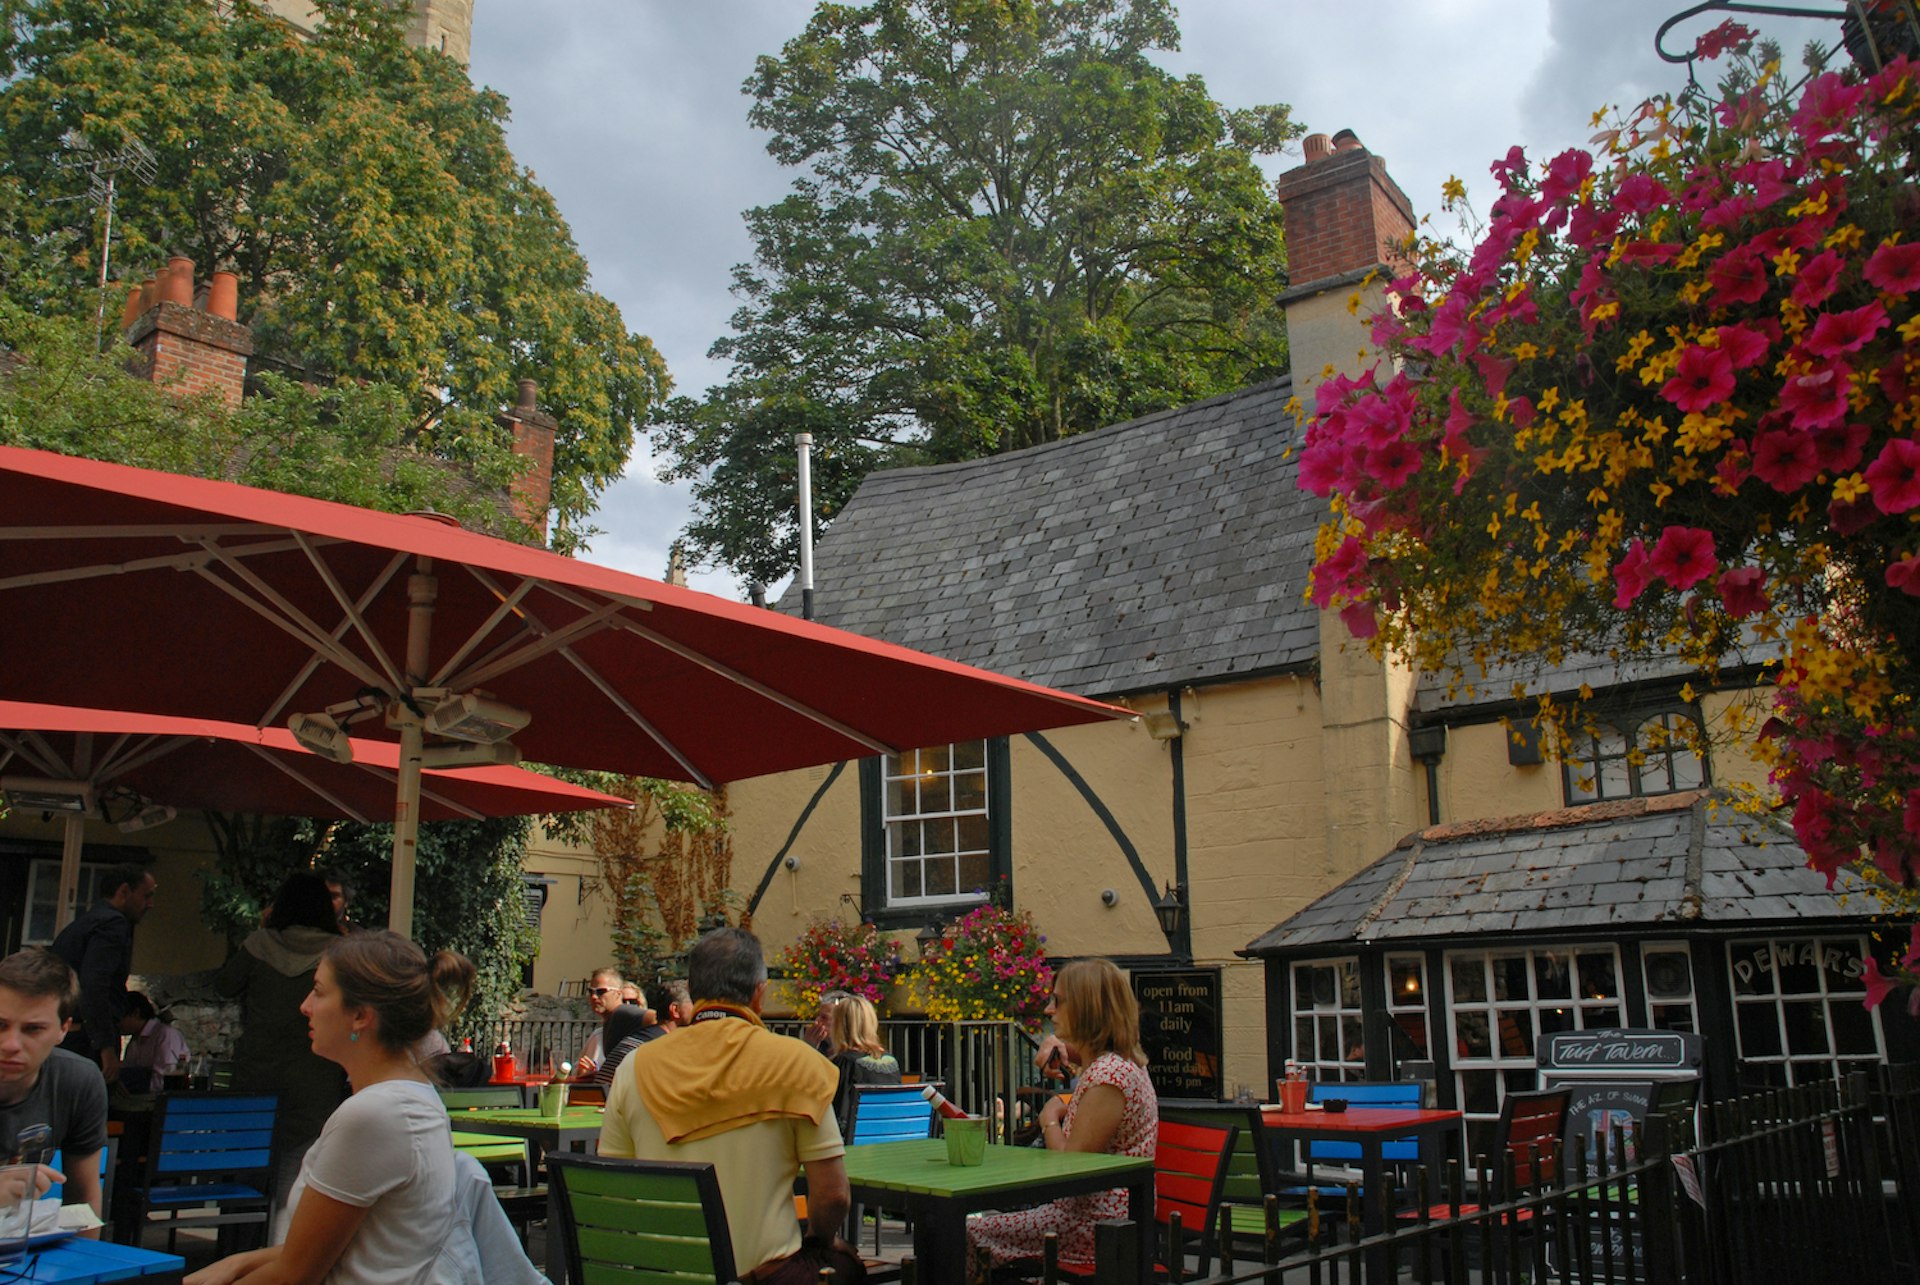 People enjoy drinks at outdoor tables in the beer garden of the Turf Tavern pub, Oxford, Oxfordshire, England, United Kingdom